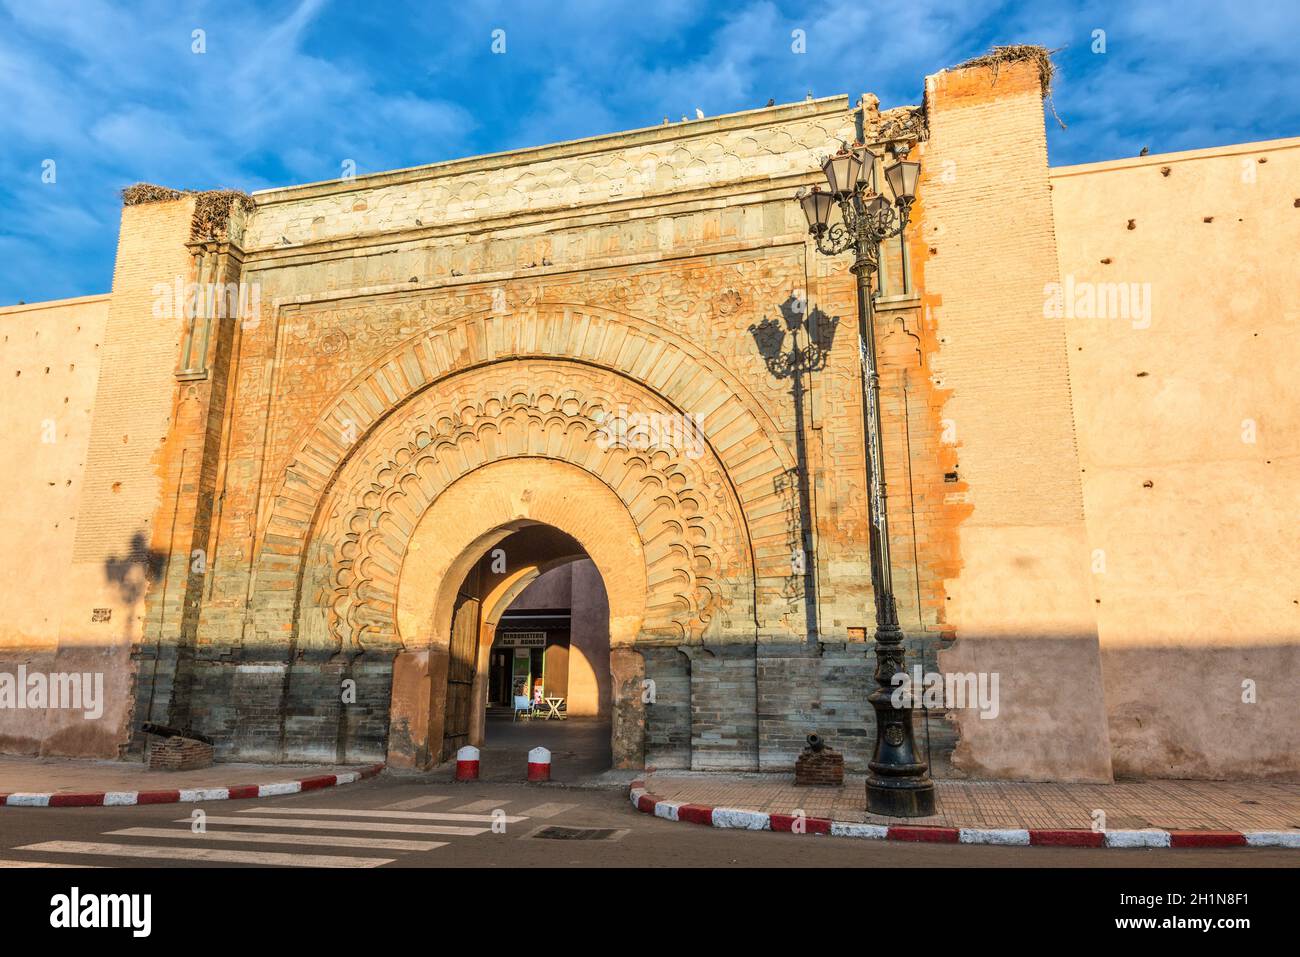 Marrakesh, Morocco - December 8, 2016: City gate Bab Agnaou - one of the nineteen gates of Marrakesh, Morocco, Africa. The old town of Marrakesh is li Stock Photo